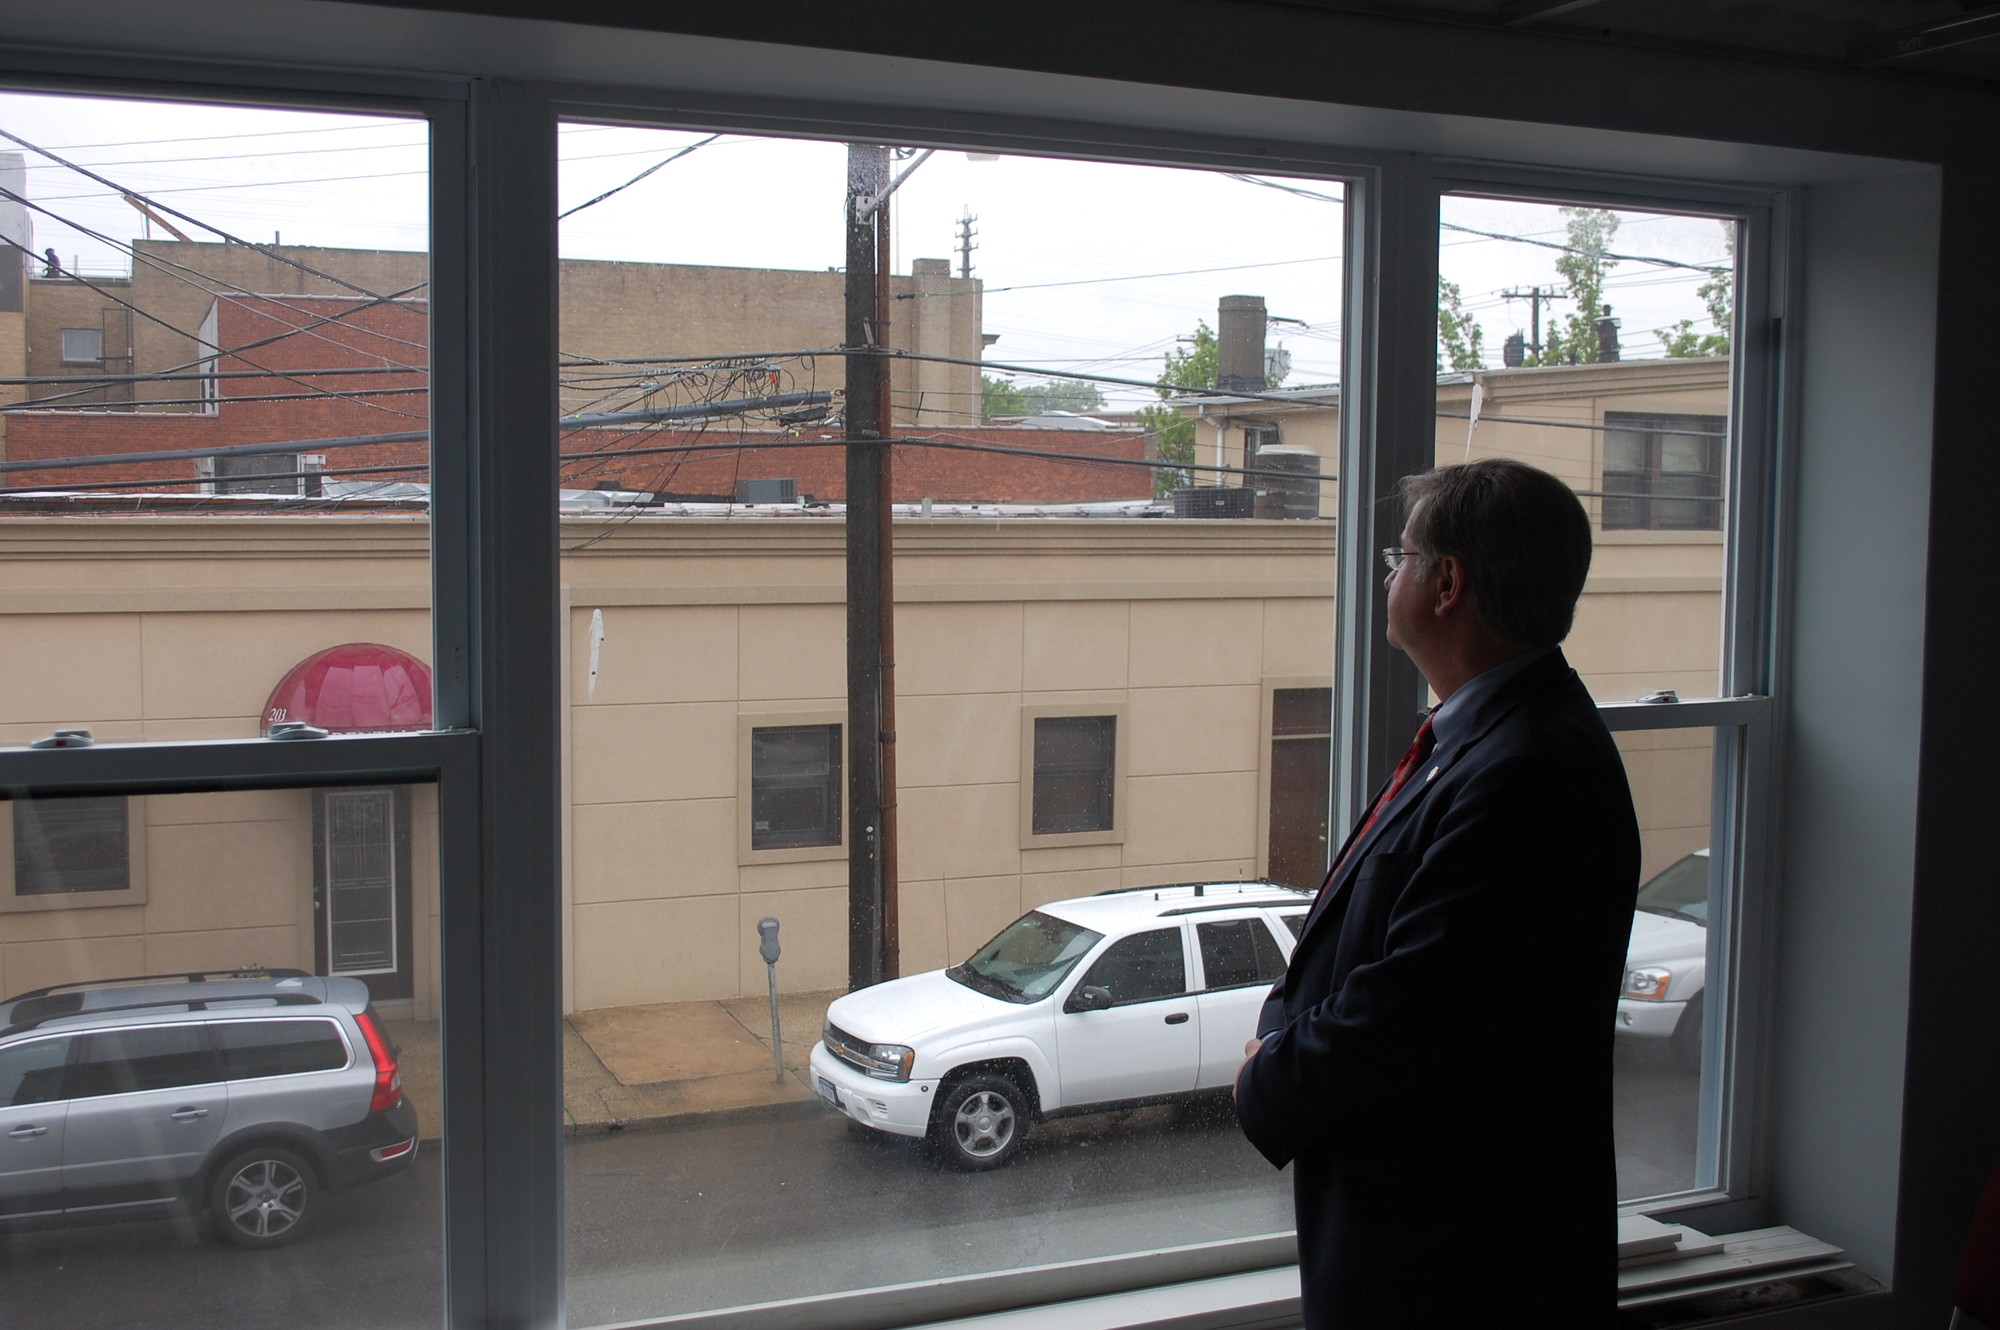 Village Justice Robert Bogle looks out the window from his future office at 195 Rockaway Ave.